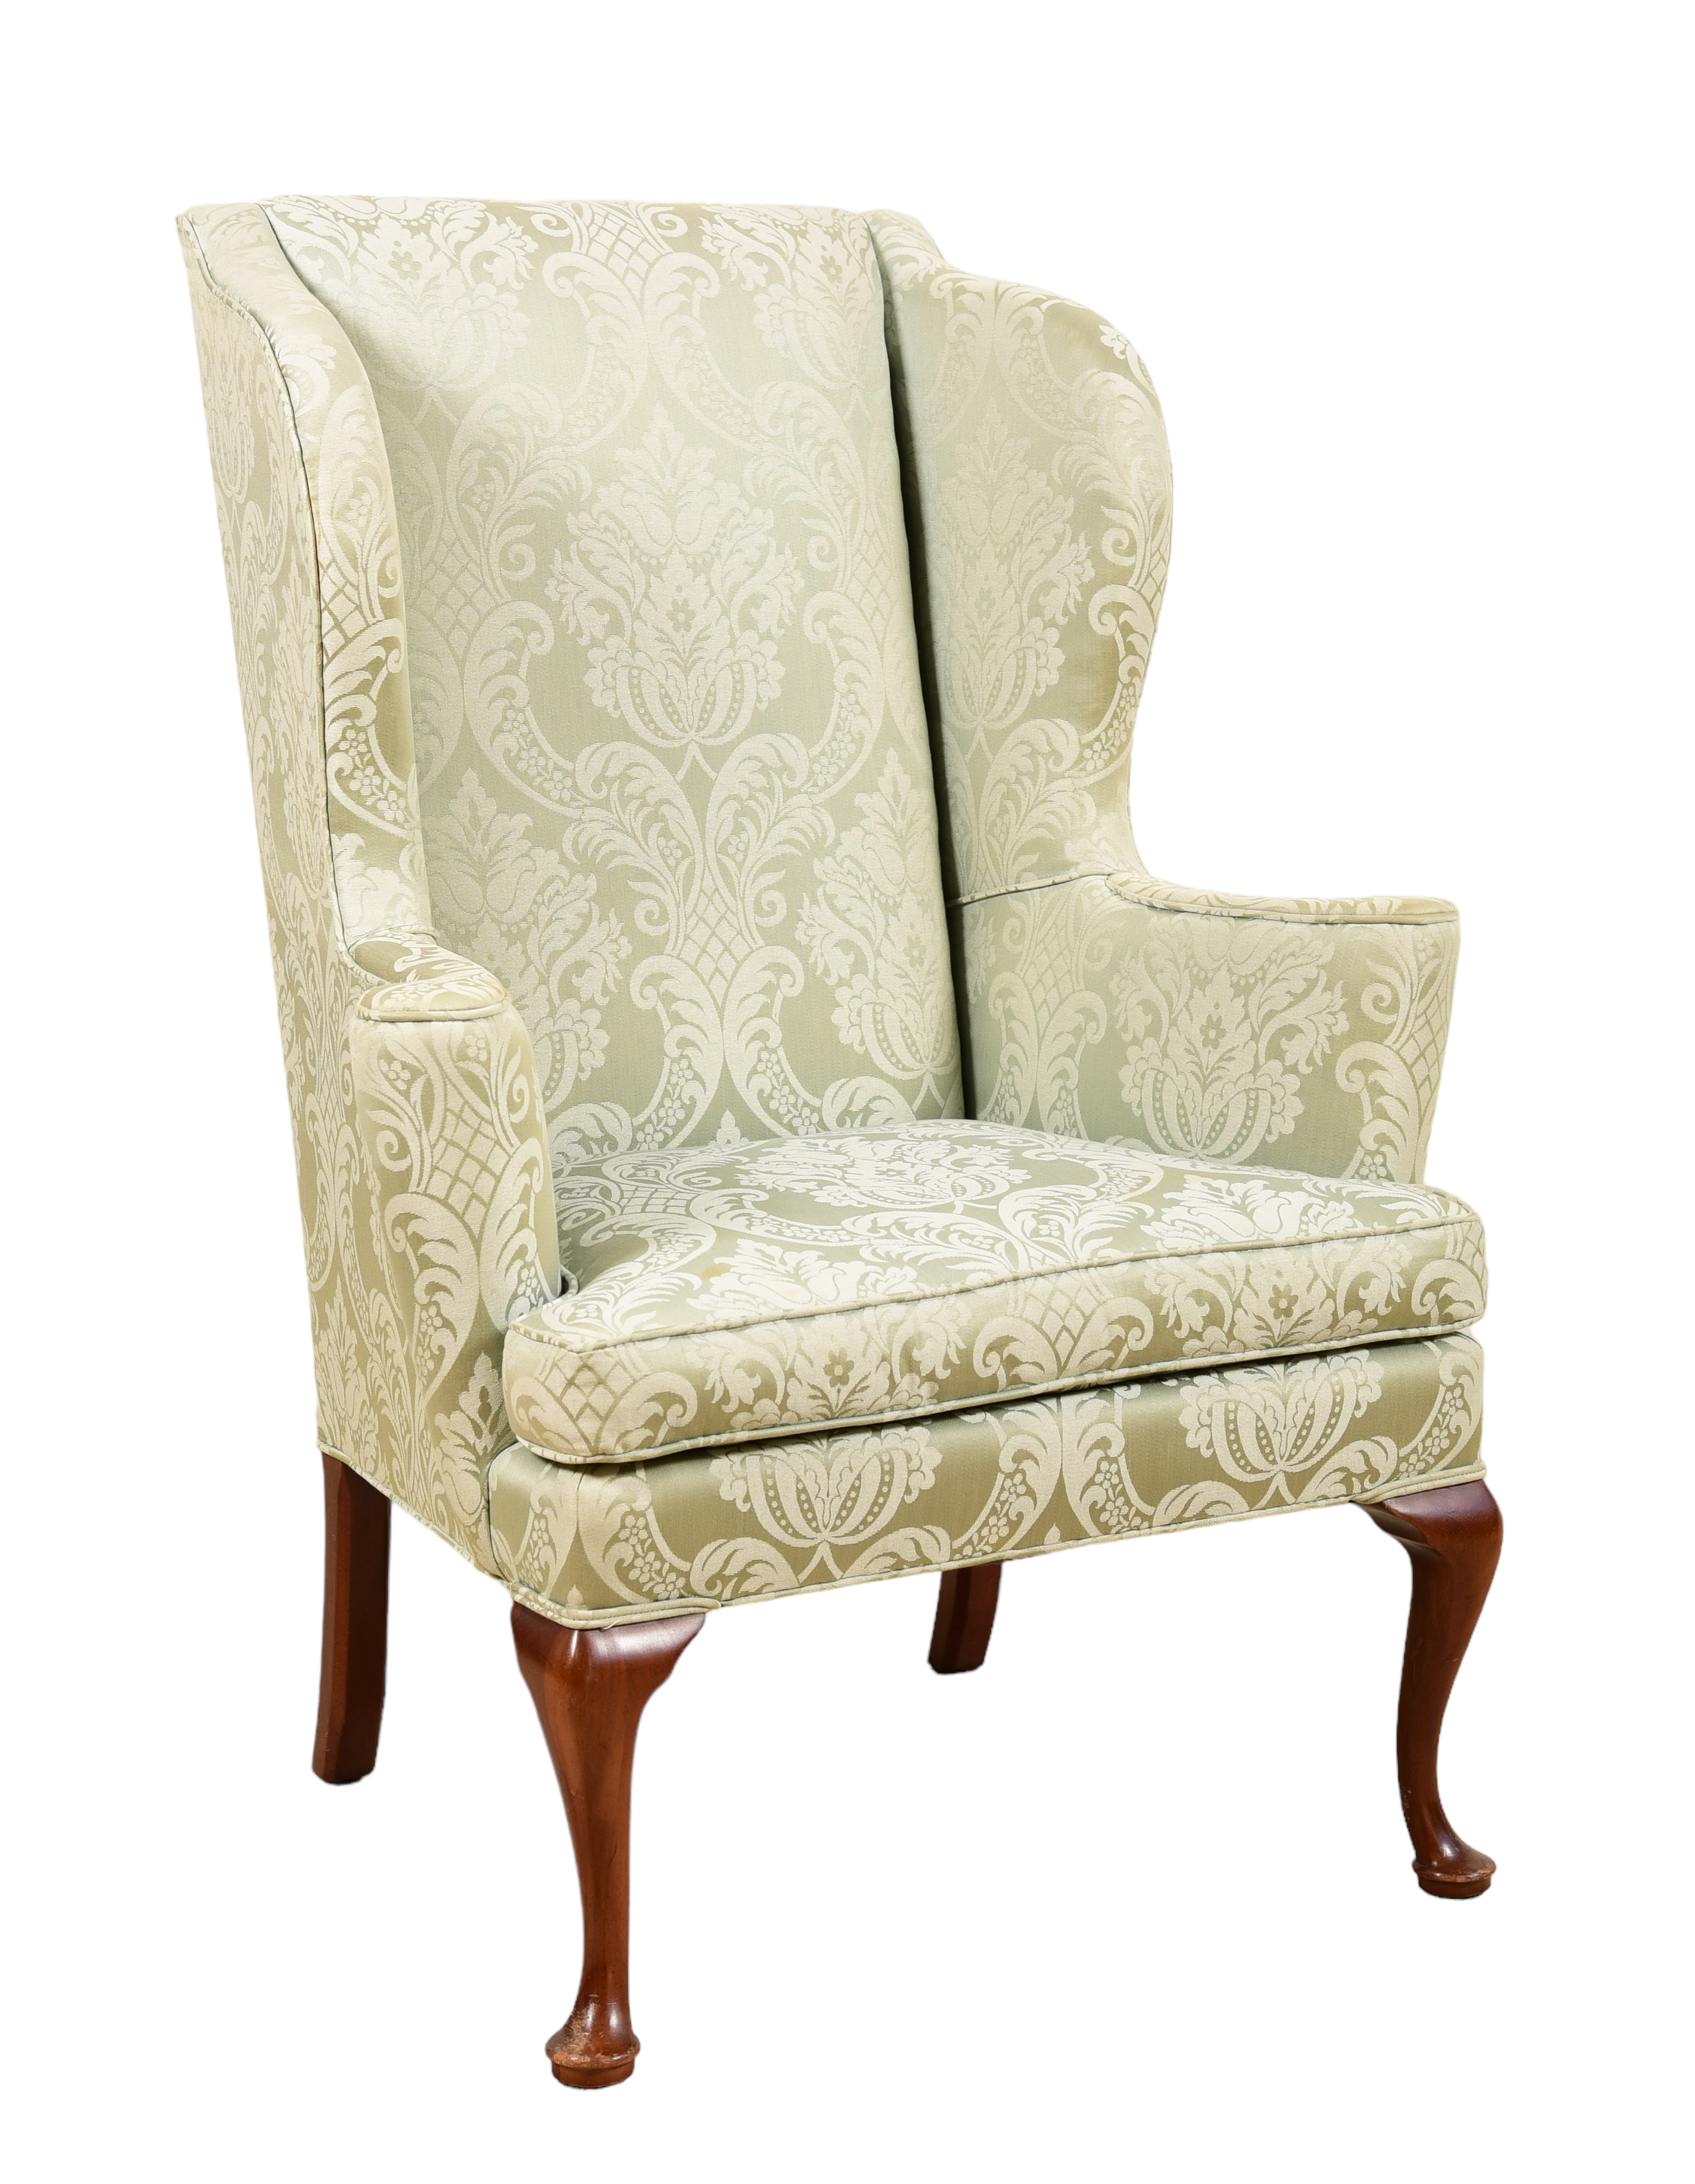 Queen Anne style upholstered wing 3c6728